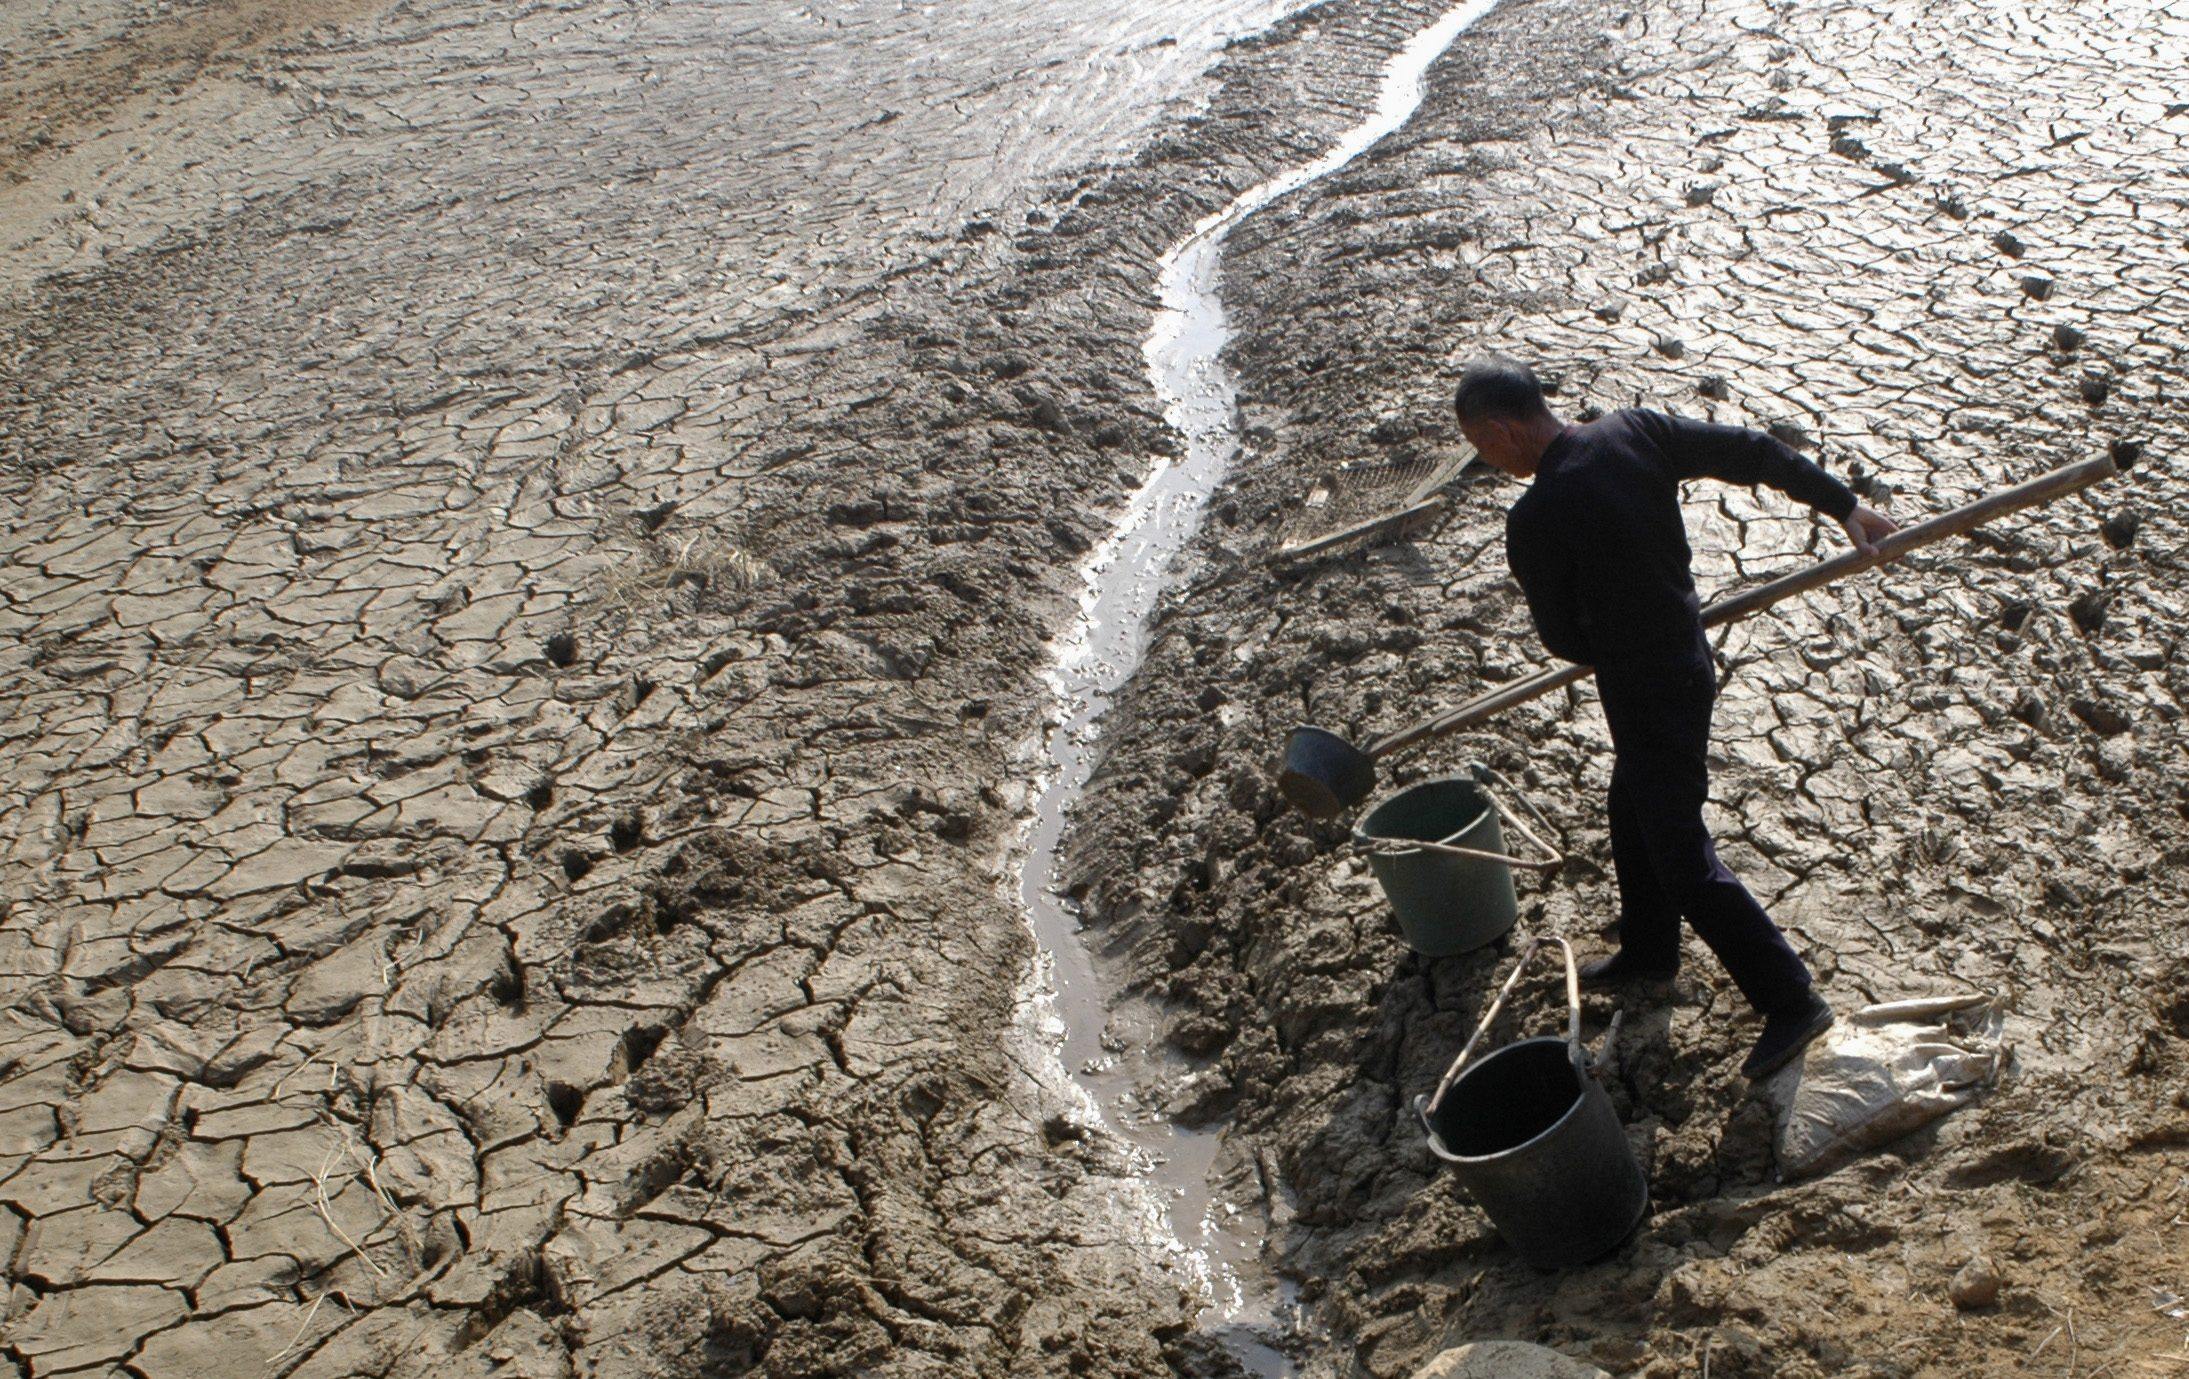 Large areas of southern China are suffering from serious drought, with water levels on two major rivers in rice-growing provinces dropping to historic lows. Photo: Reuters